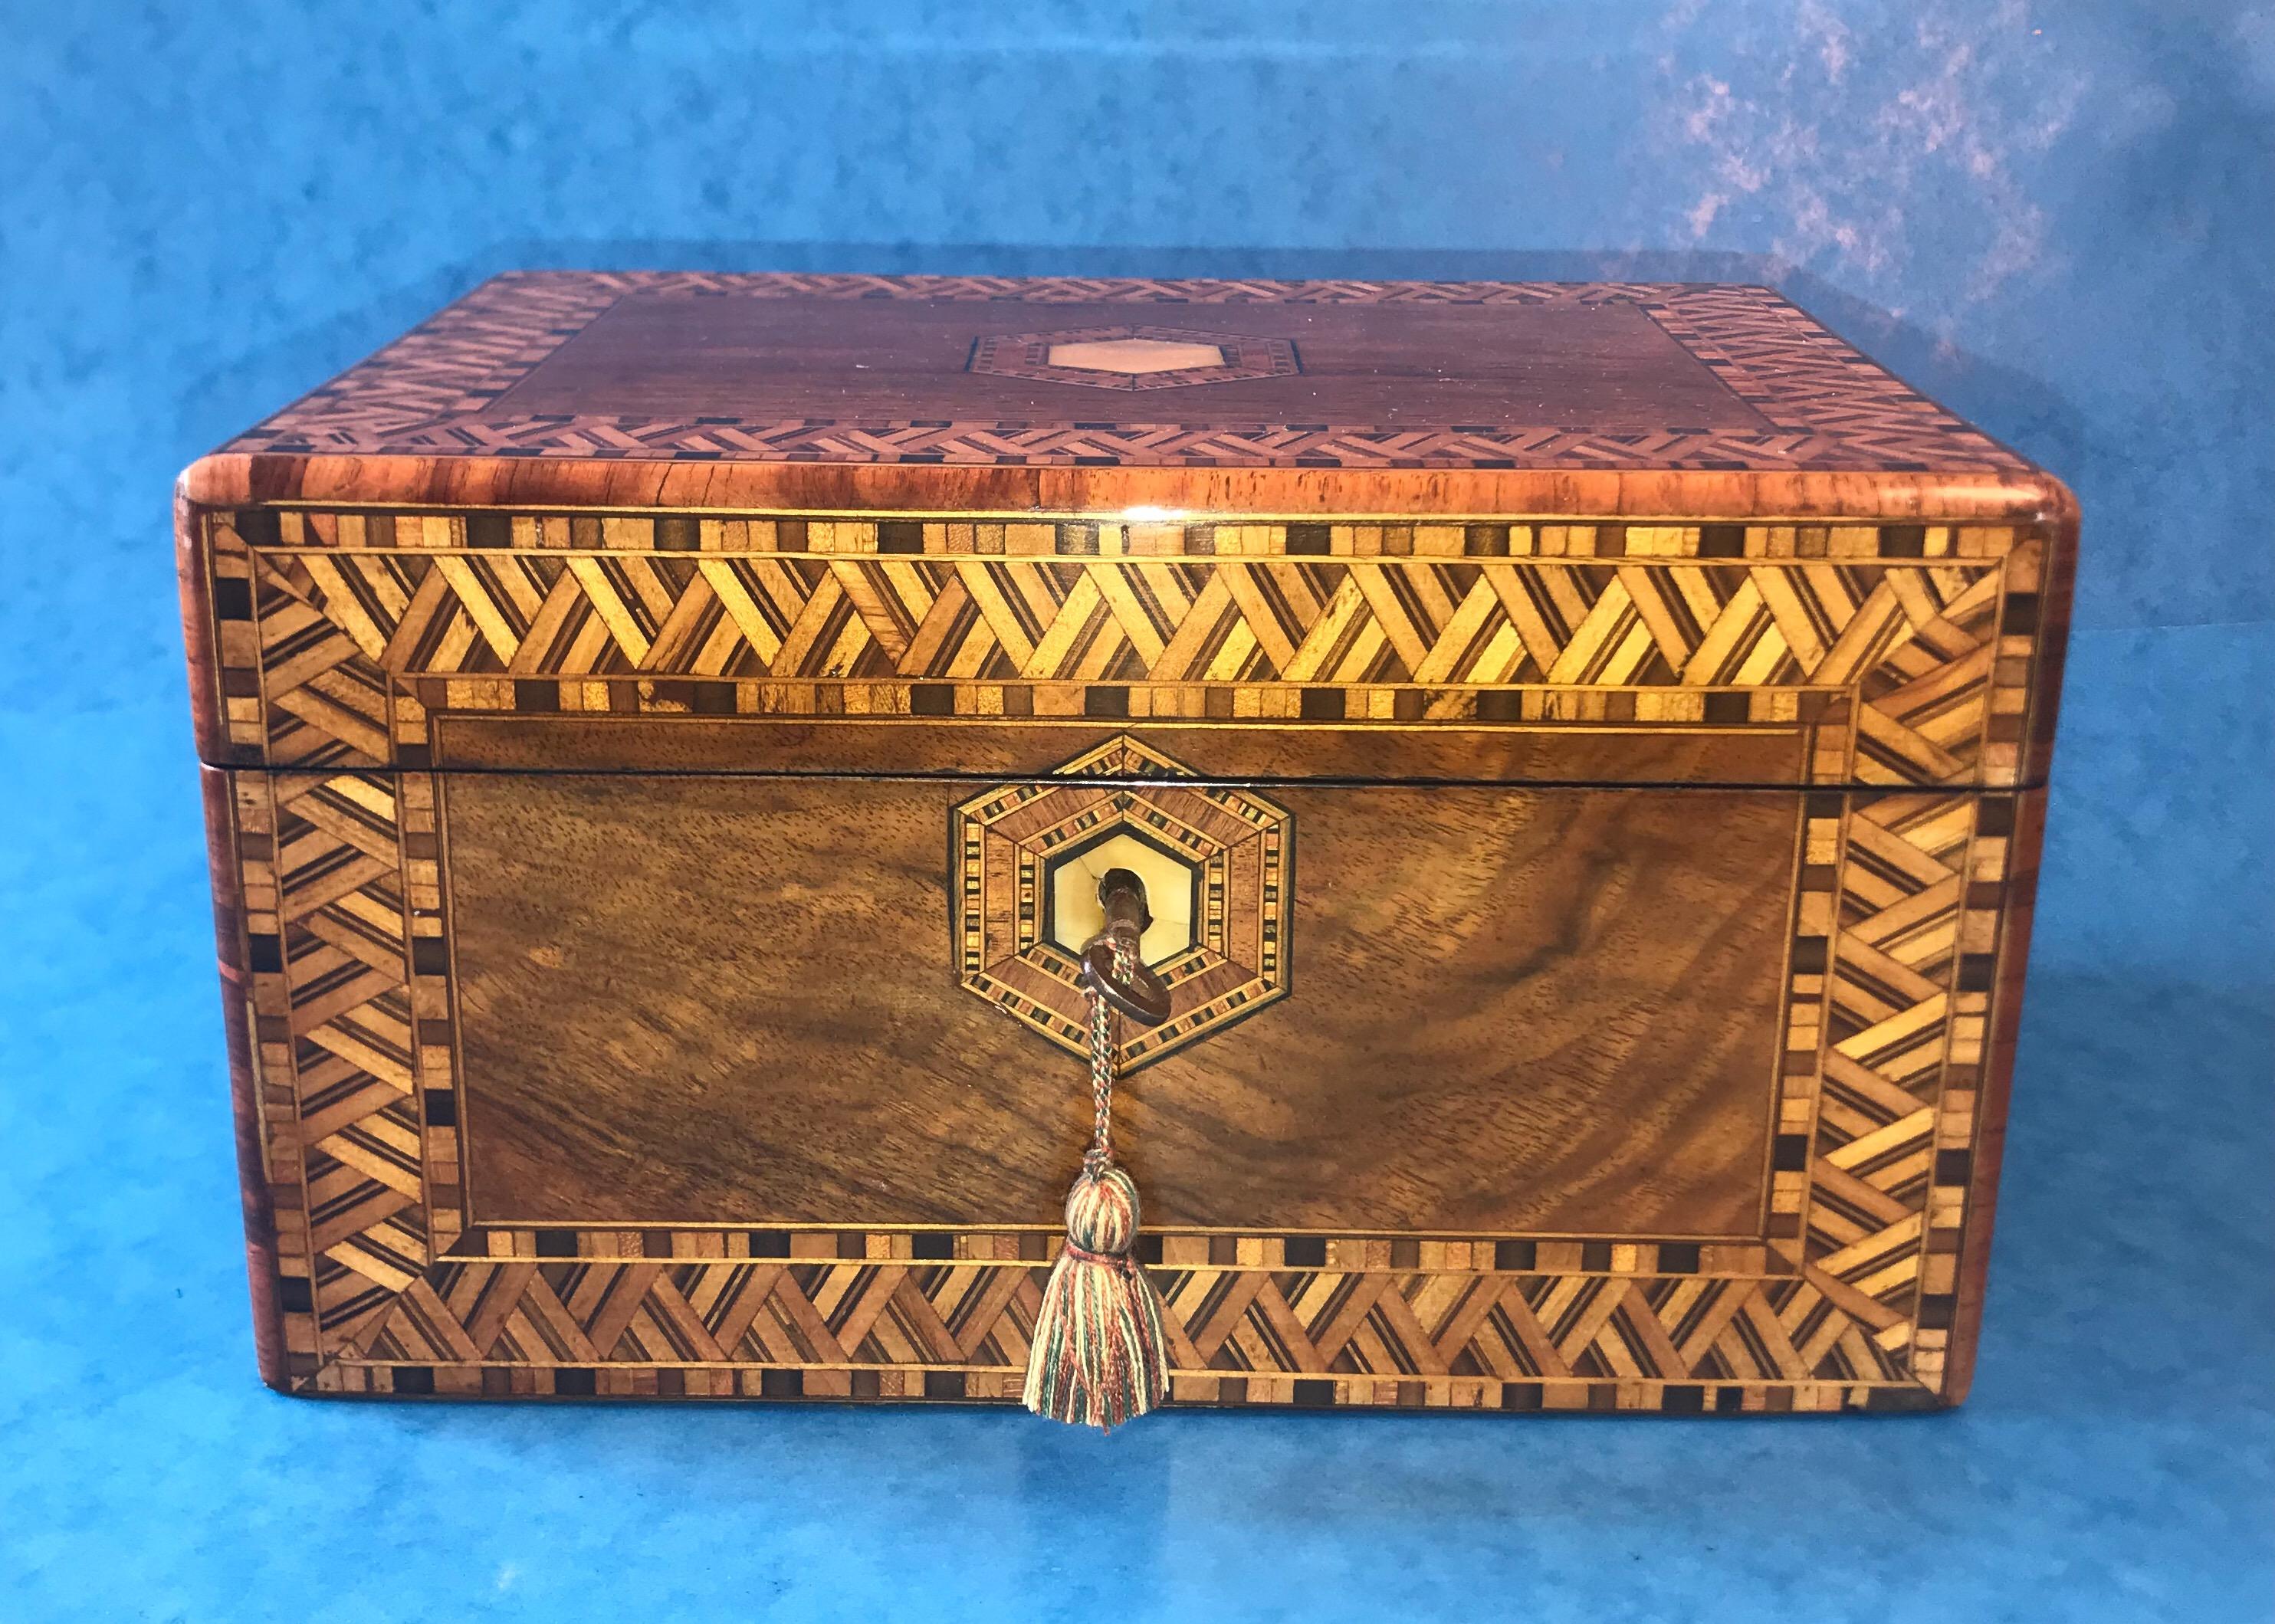 Victorian 1880 inlaid walnut Tunbridge ware box. It is striking and one of a kind with hexagon inlaid MOP centre to the top and key escutcheon. Open the box to reveal an ebony slip to the inside and the internal lid and base professionally relined